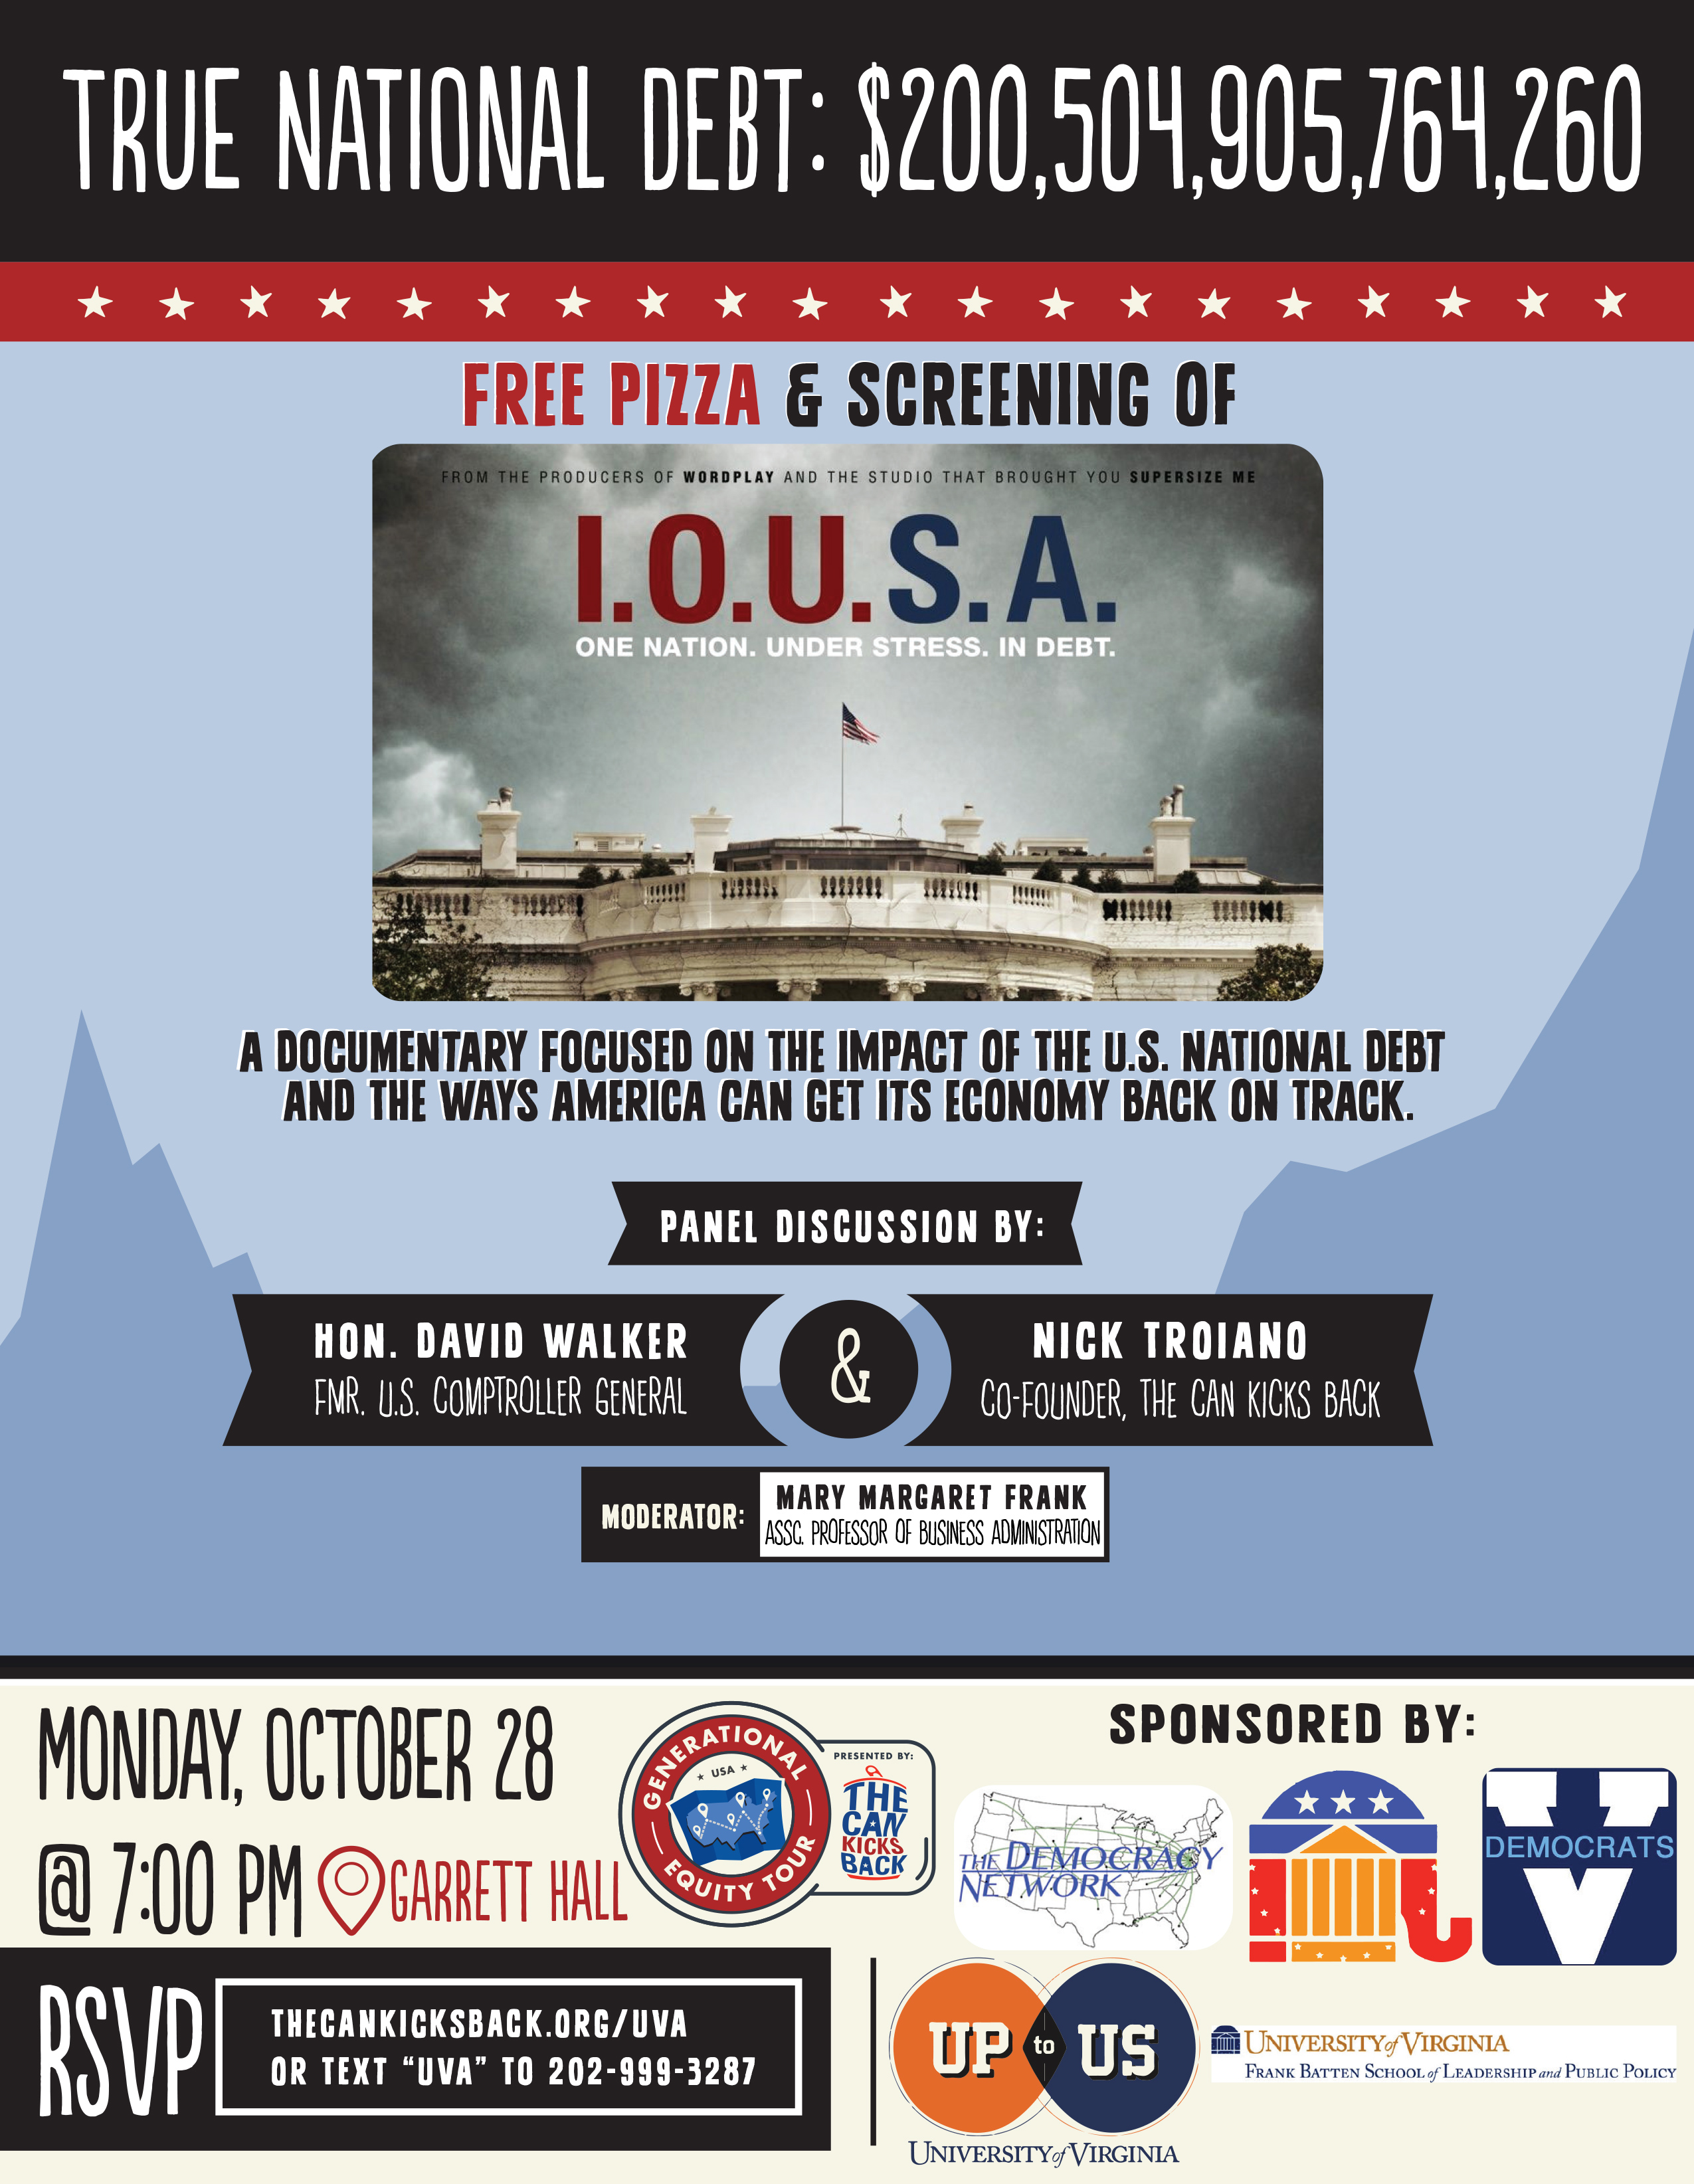 Text reads: True National Det: $200,504,905,764,260.  Free pizza & Screening of I.o.u.s.a one nation. under stress. in debt. a documentary focused on the impact of the US national debt and the ways america can get its economy back on track.  Panel discussion by: Hon. DAvid walker fmr us comptroller general & Nick Troiano co-founder, the can kicks back.  Moderator: Mary Margret Frank Assc. Professor of Business Administration